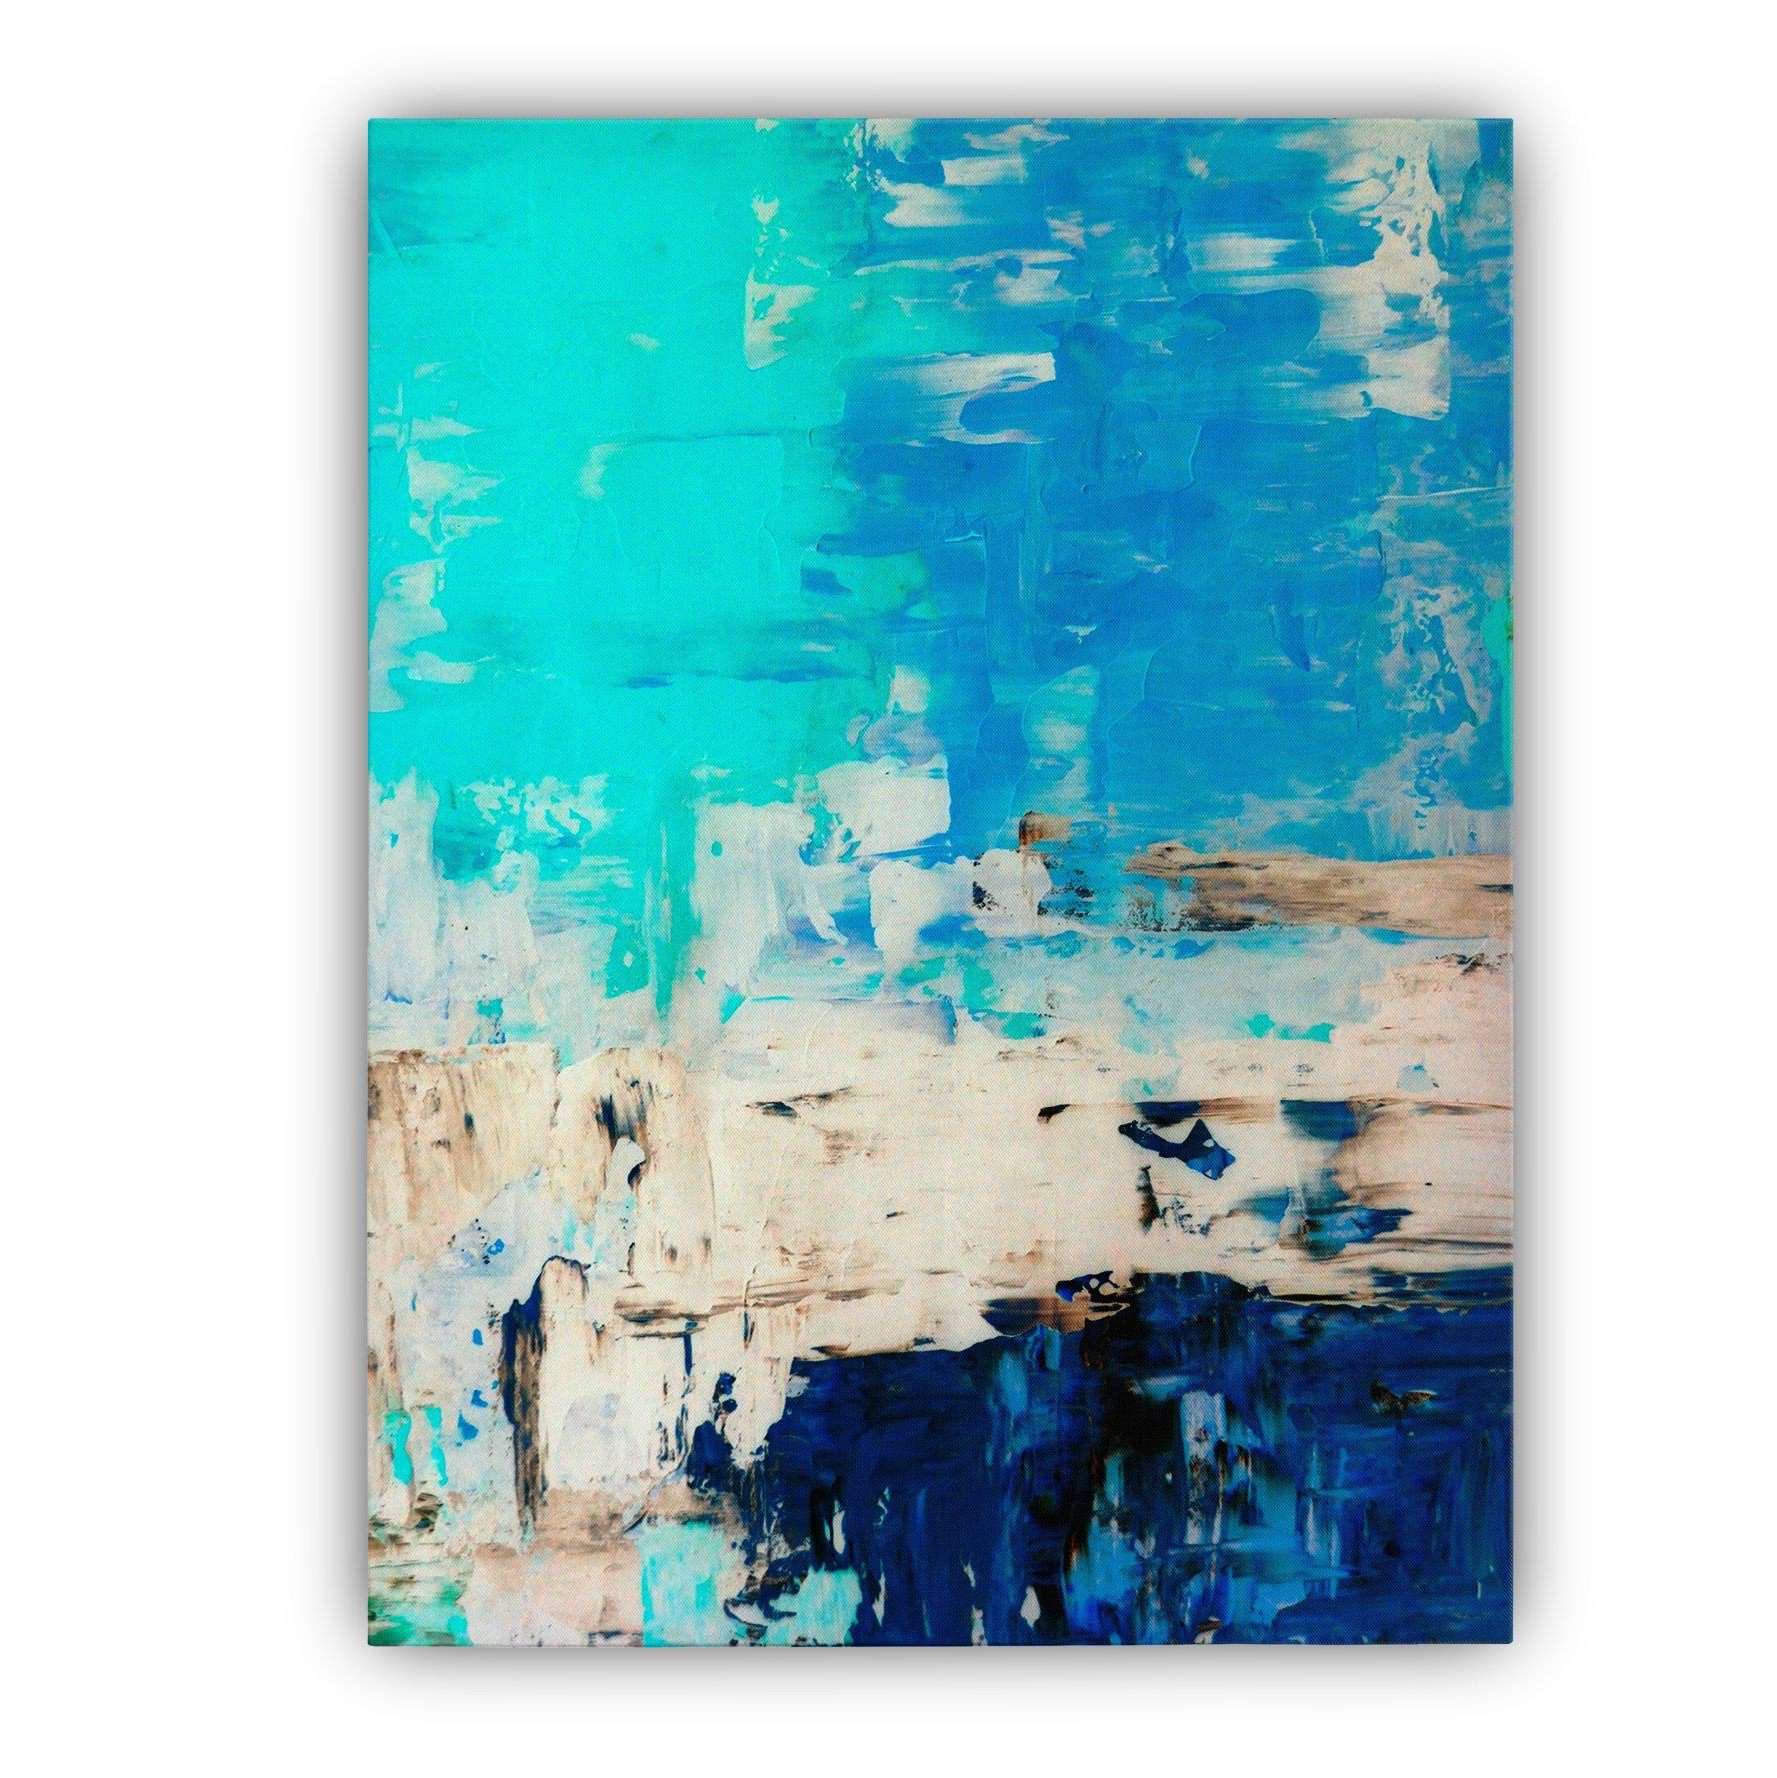 Teal and Beige Abstract Canvas Magna Canvas 